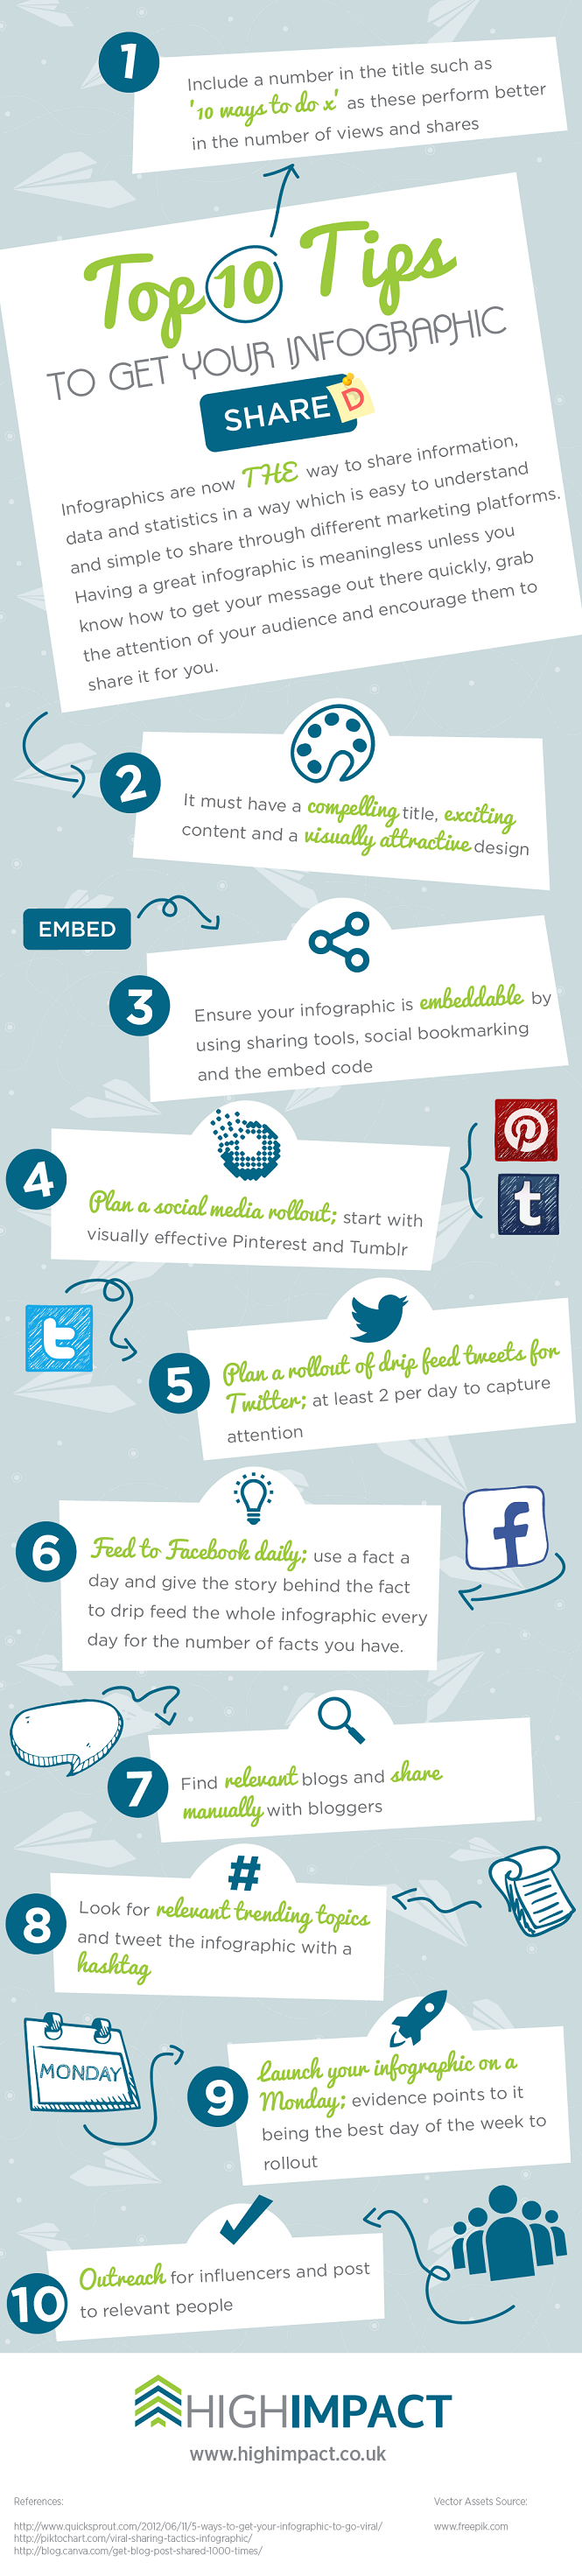 How to Get Your Infographic Noticed on the internet and social web